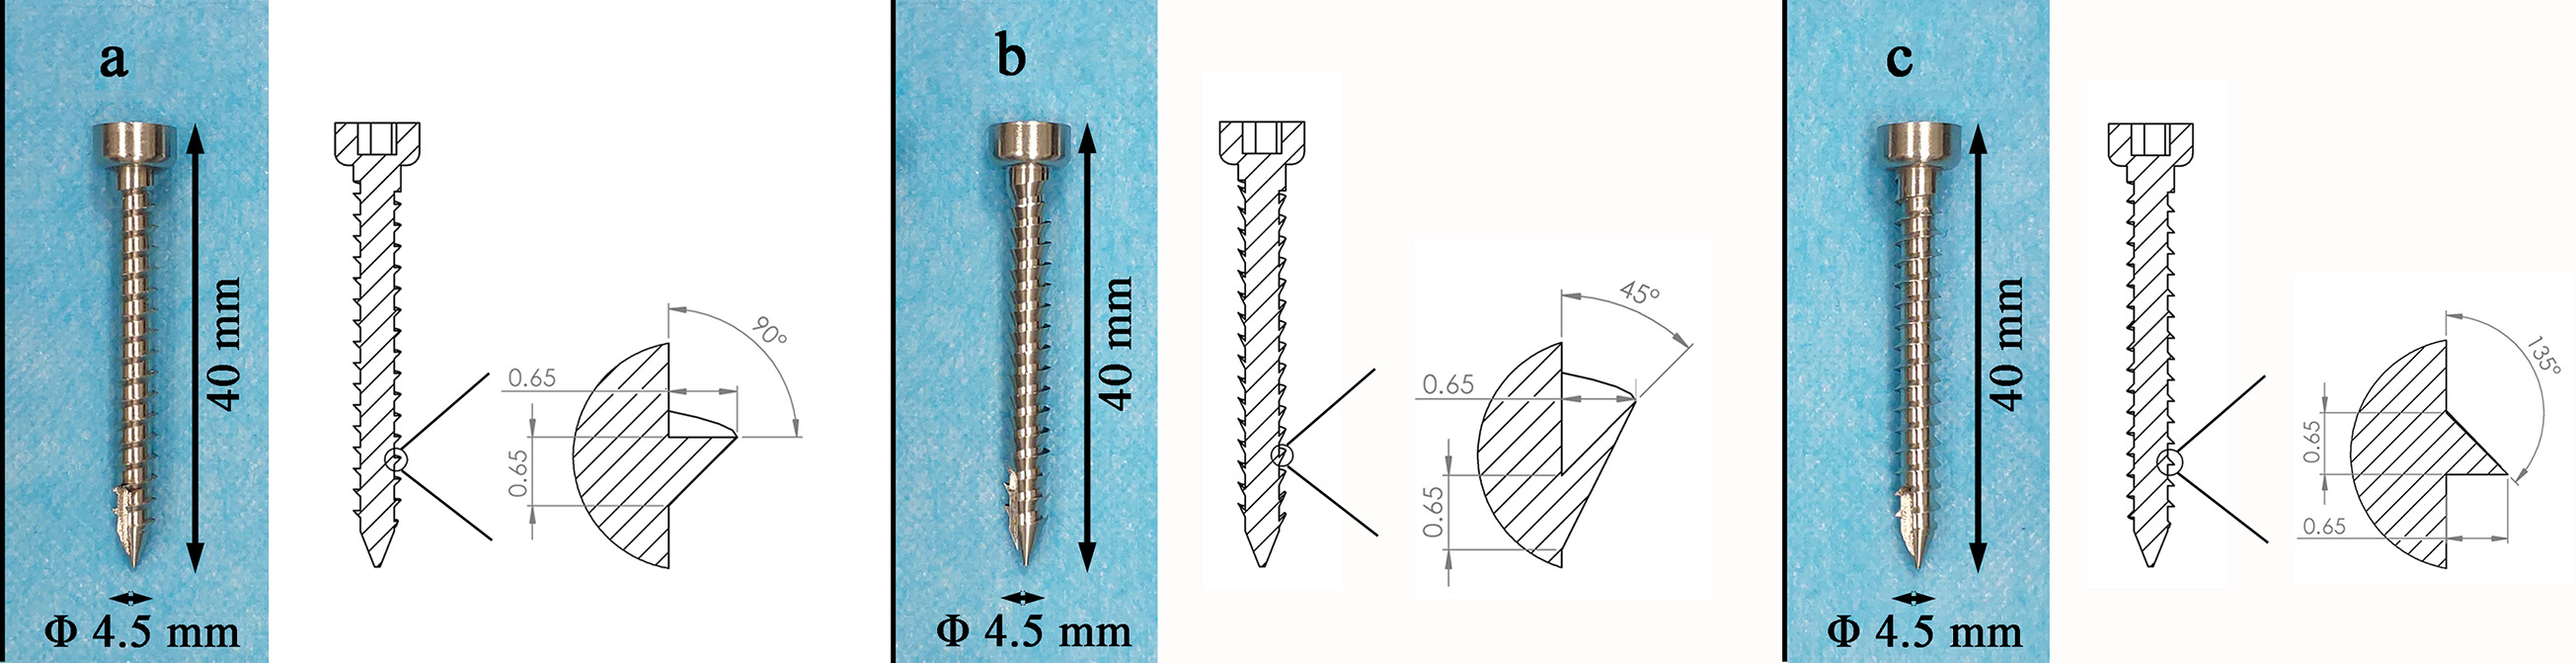 Fig. 1 
            Types of screws analyzed in this study included the a) buttress thread screw, b) barb thread screw, and c) reverse buttress thread screw.
          